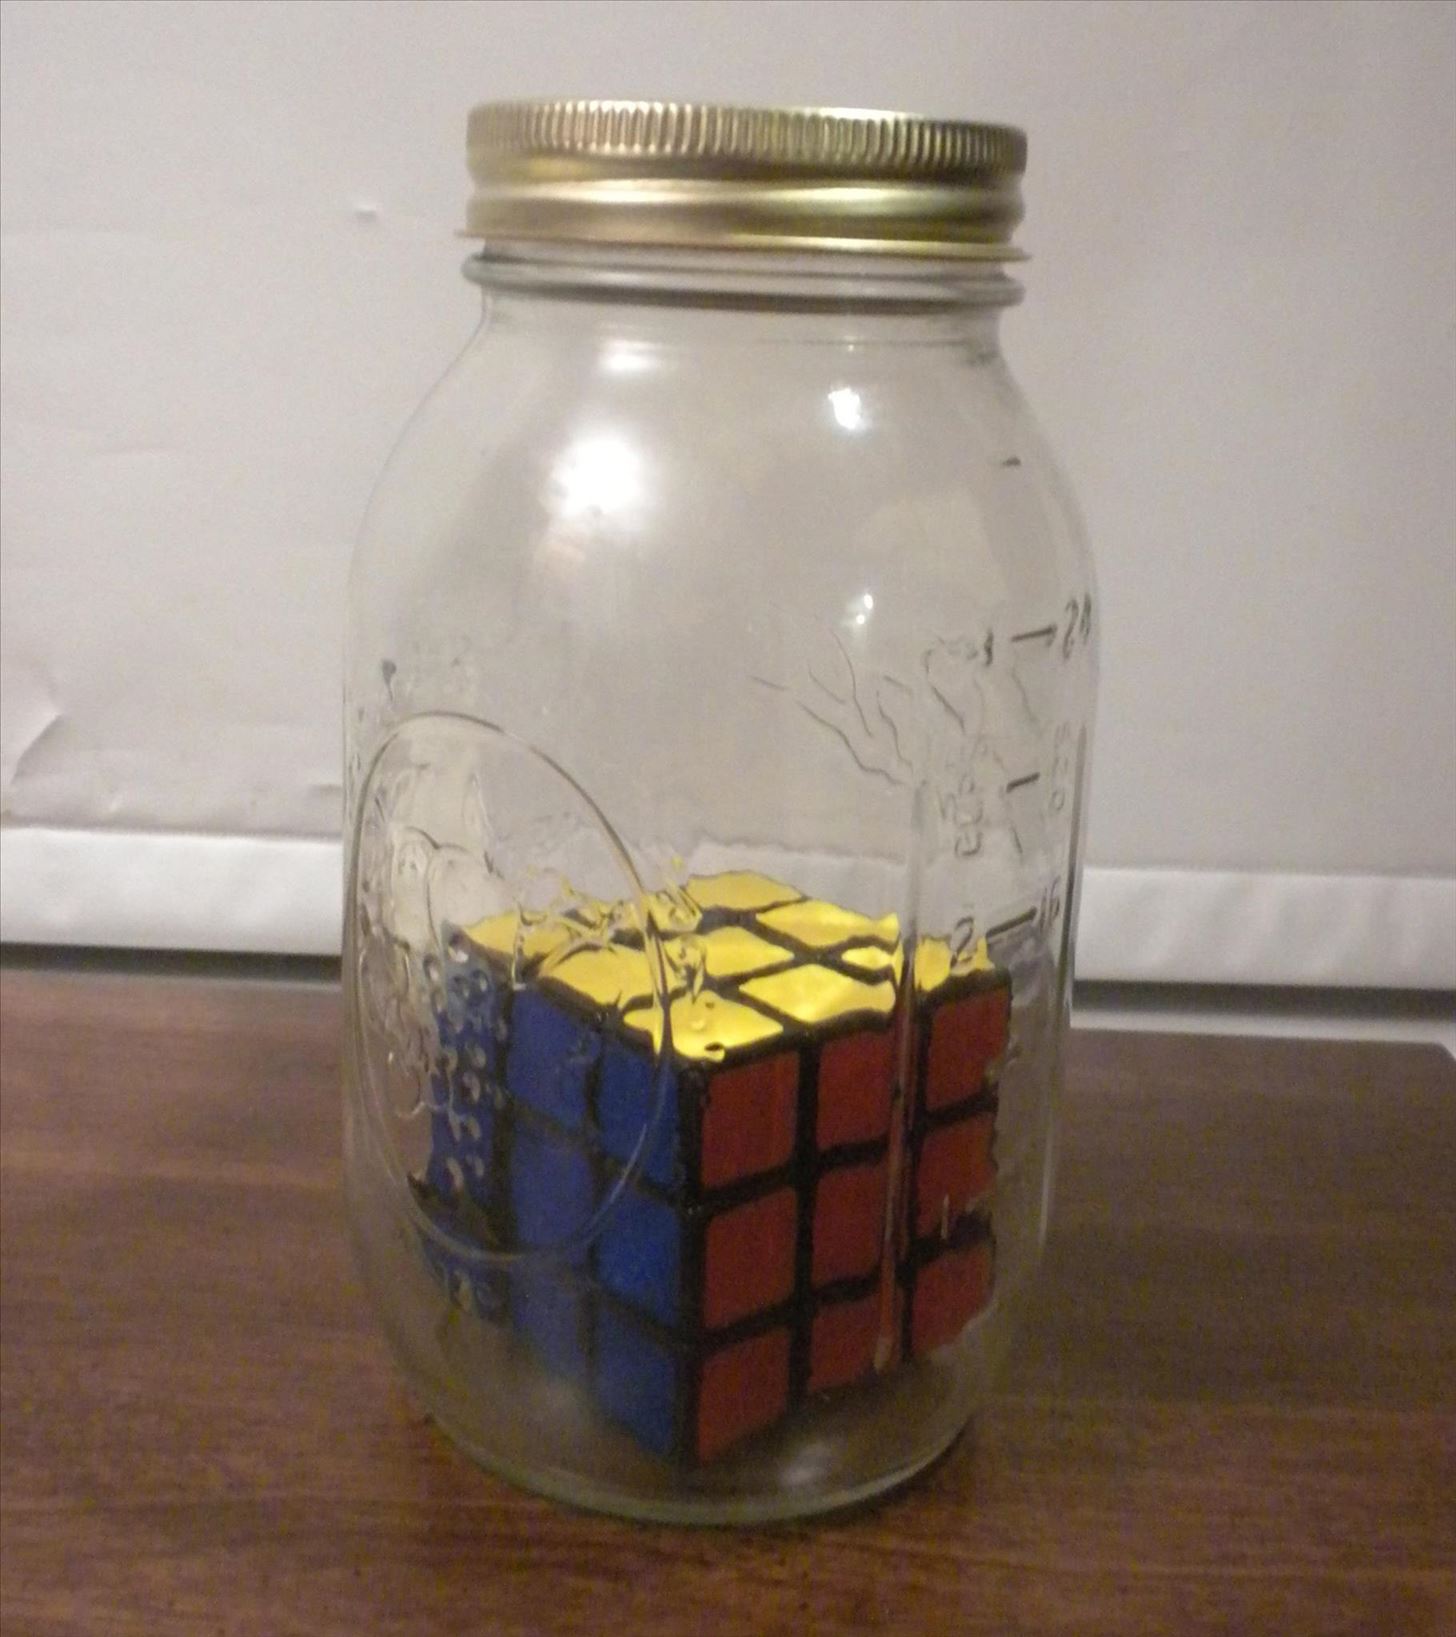 How to Tick Off Your Friends with a DIY Rubik's Cube Puzzle That's Impossible to Solve